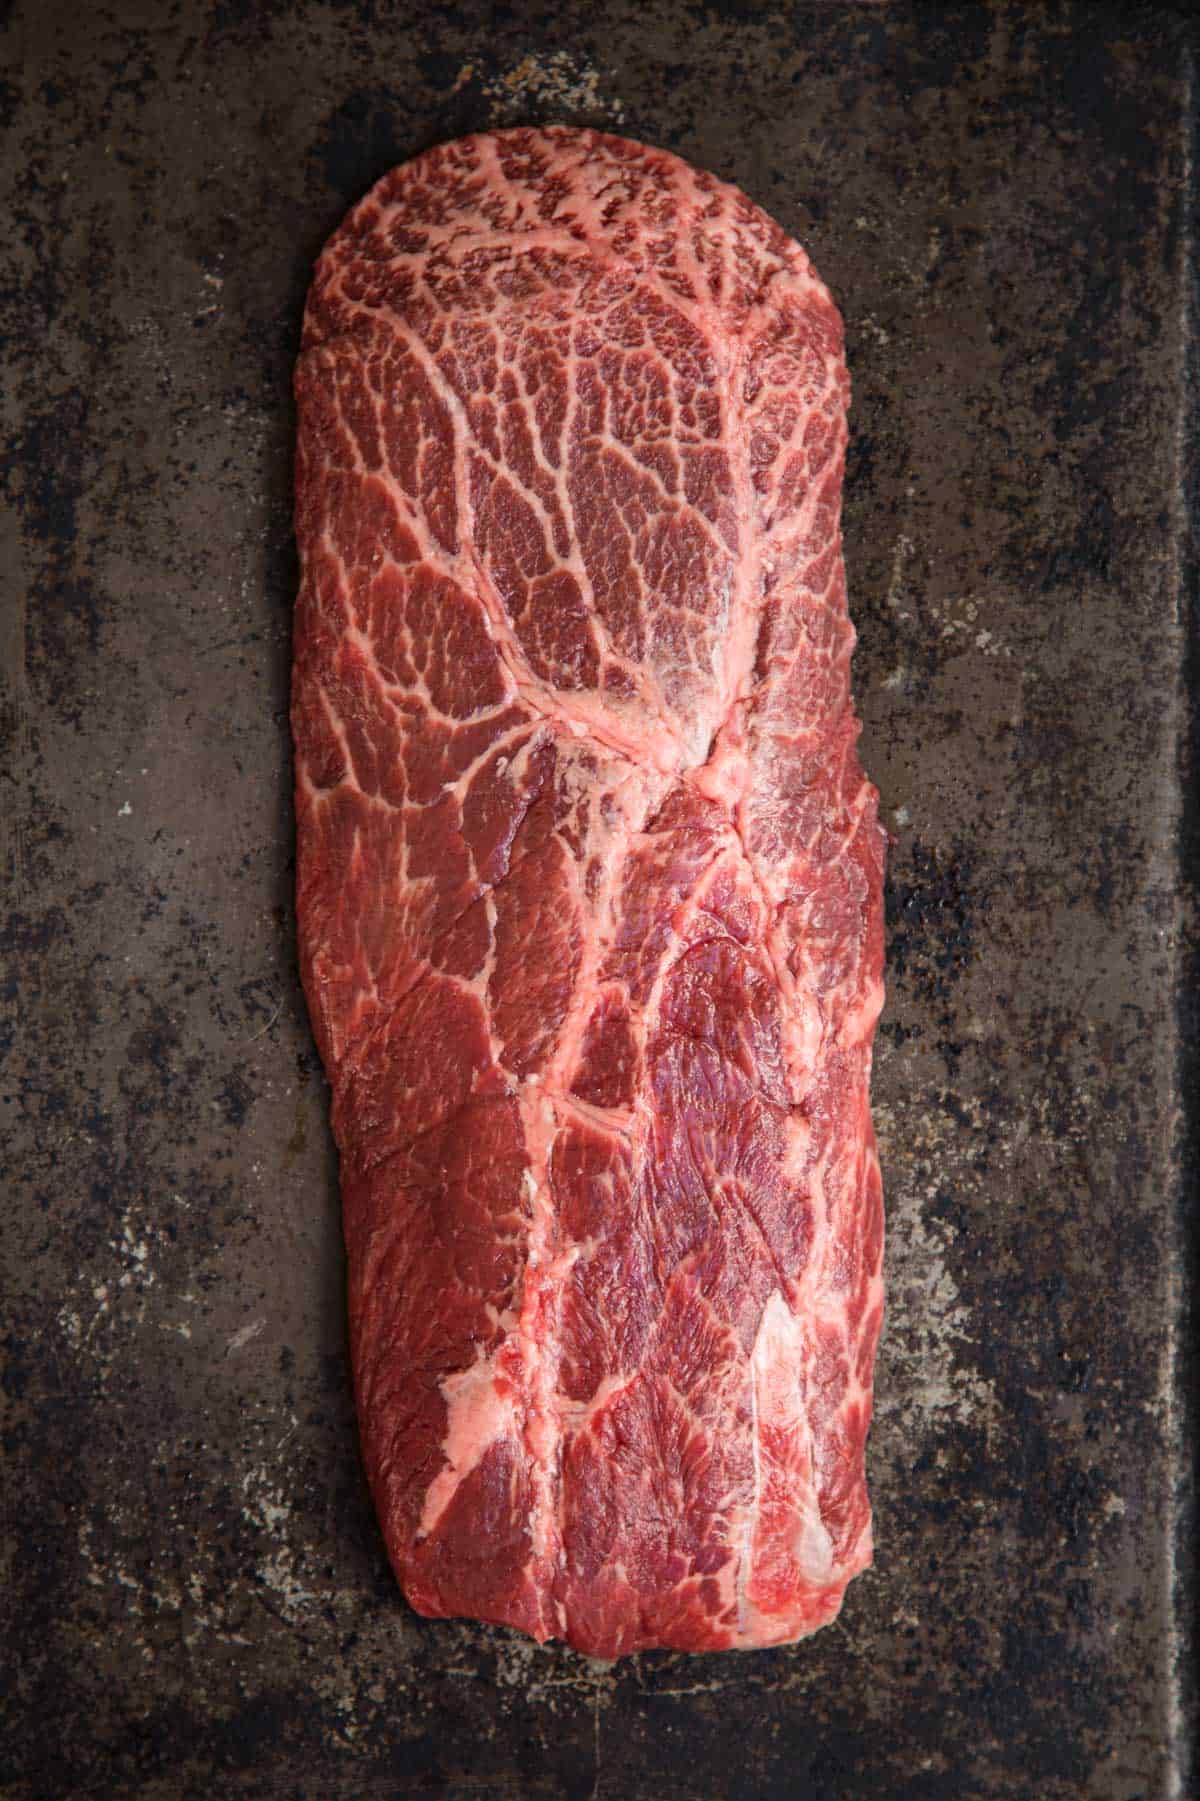 Raw Flat Iron Steak with veins of marbling and pre seasoned.